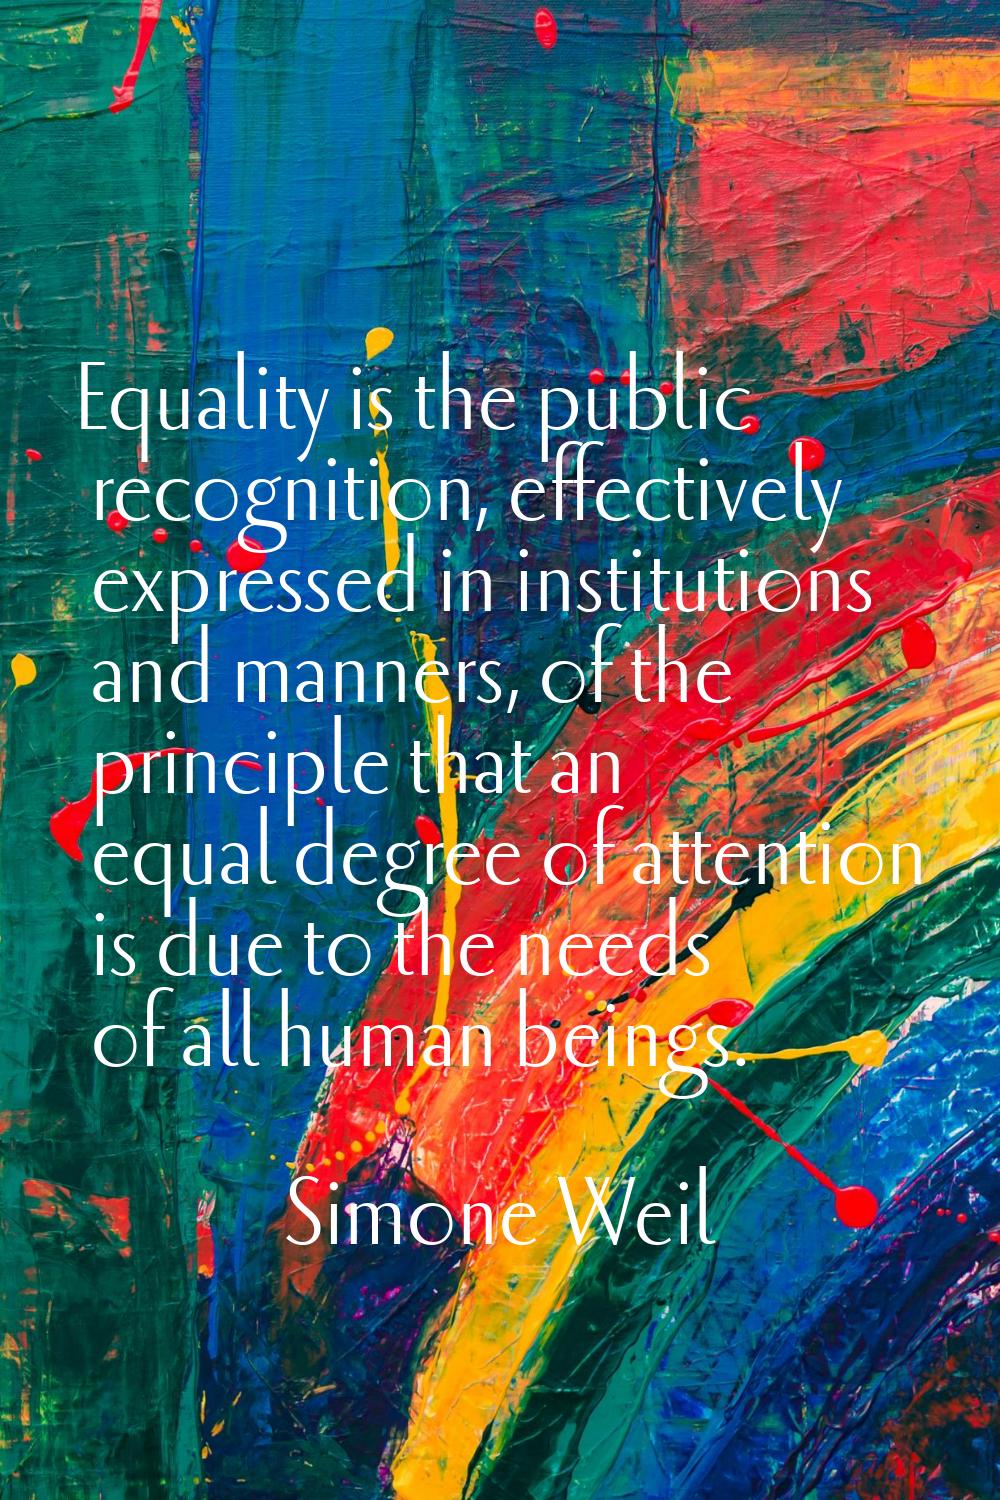 Equality is the public recognition, effectively expressed in institutions and manners, of the princ